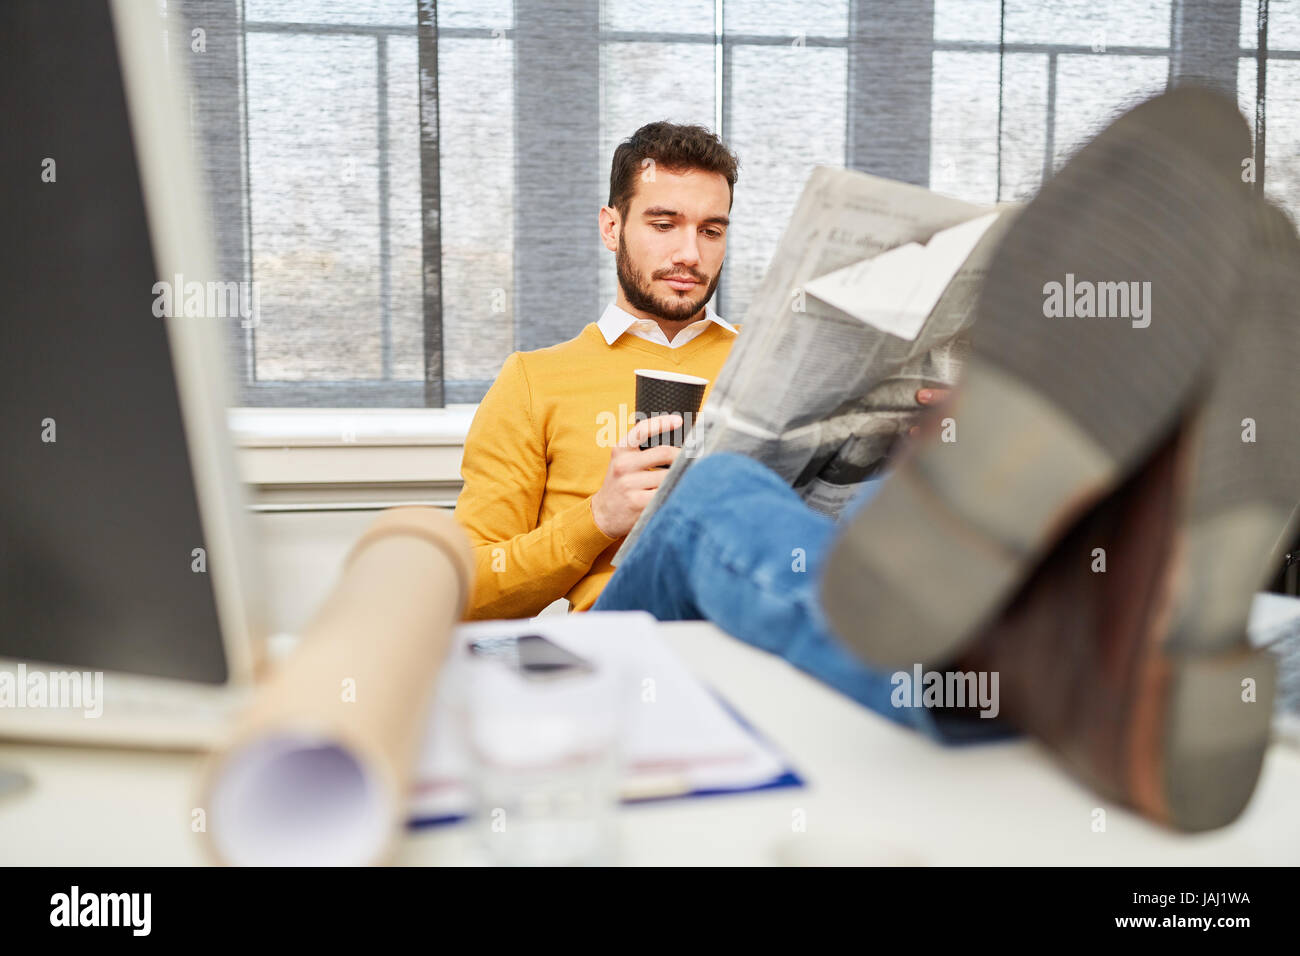 Man reading newspaper at office during coffee break relaxation Stock Photo